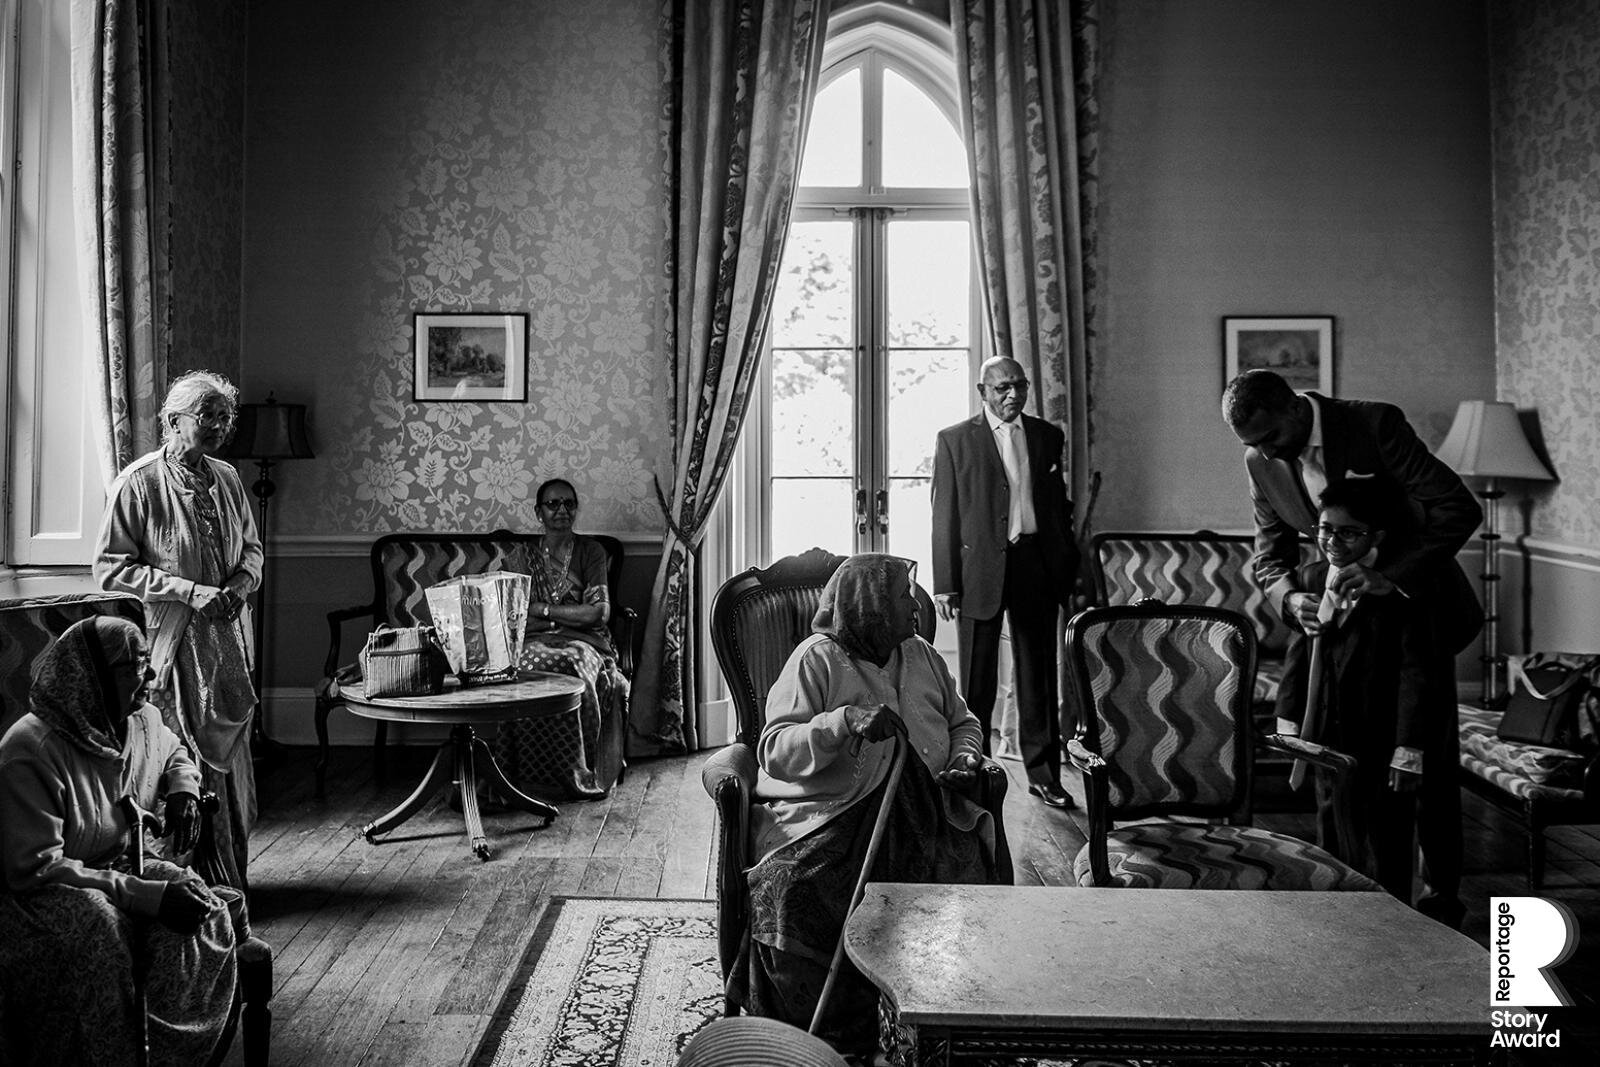  boy and elderly relatives in a quiet room at the wedding 